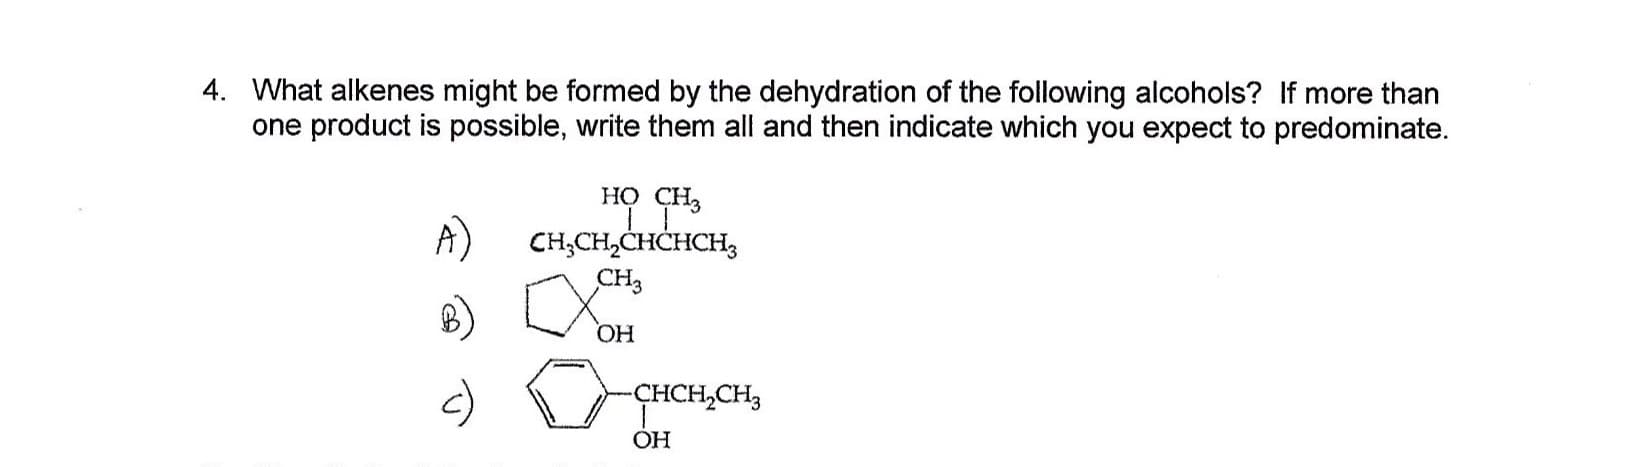 4. What alkenes might be formed by the dehydration of the following alcohols? If more than
one product is possible, write them all and then indicate which you expect to predominate.
но сн,
A)
CH,CH2CHCHCH3
сHз
ОН
-ҫнCH,CH,
OH
